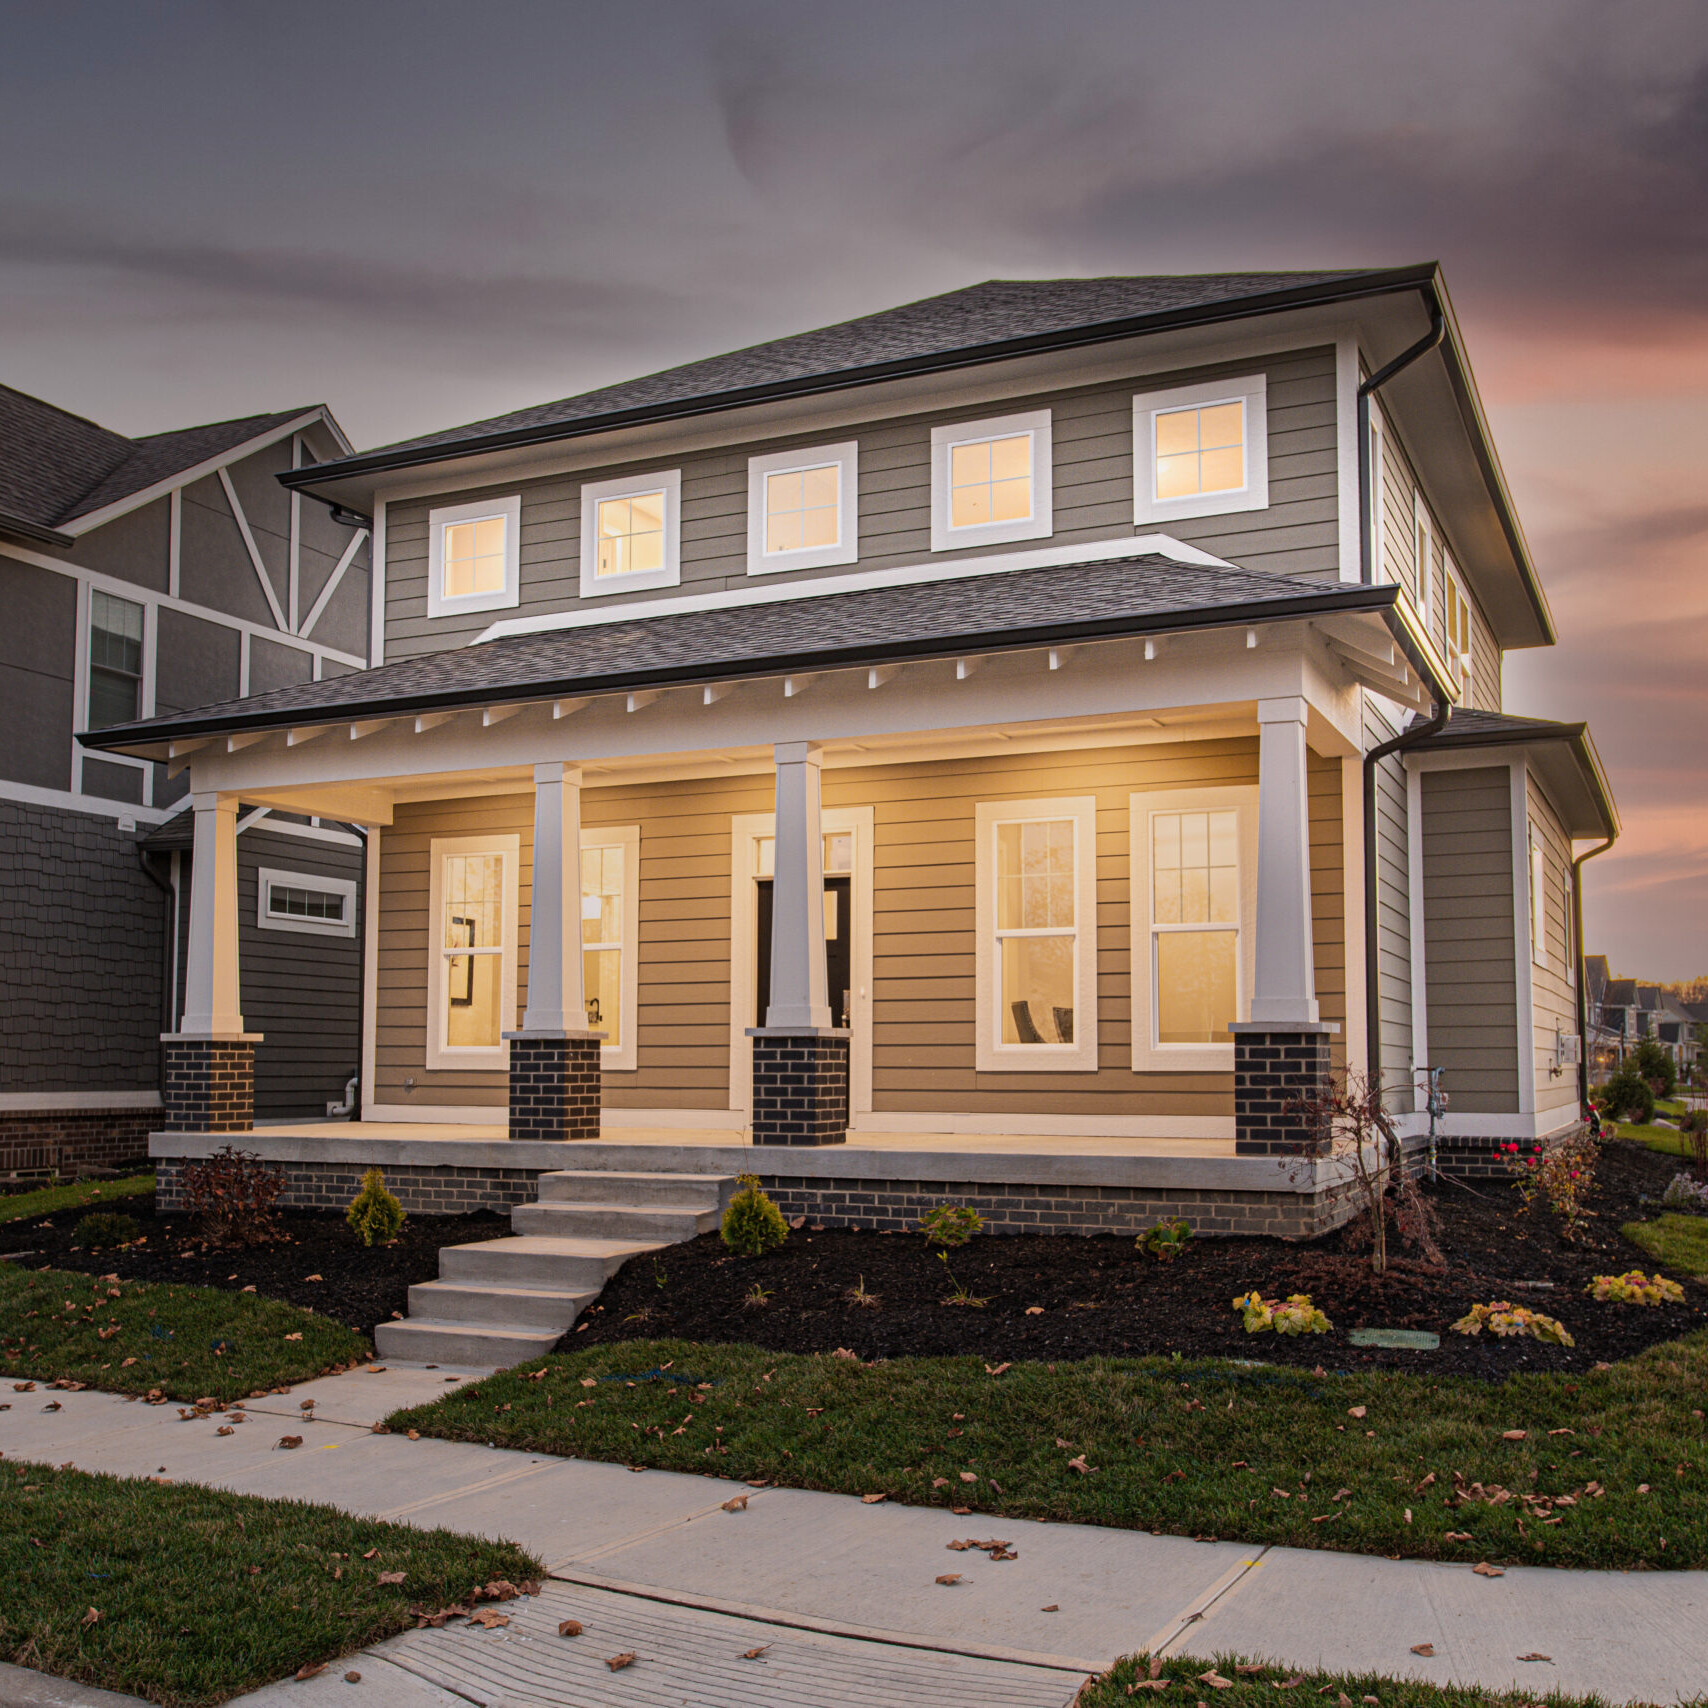 A custom home with a front porch at dusk in Westfield, Indiana.